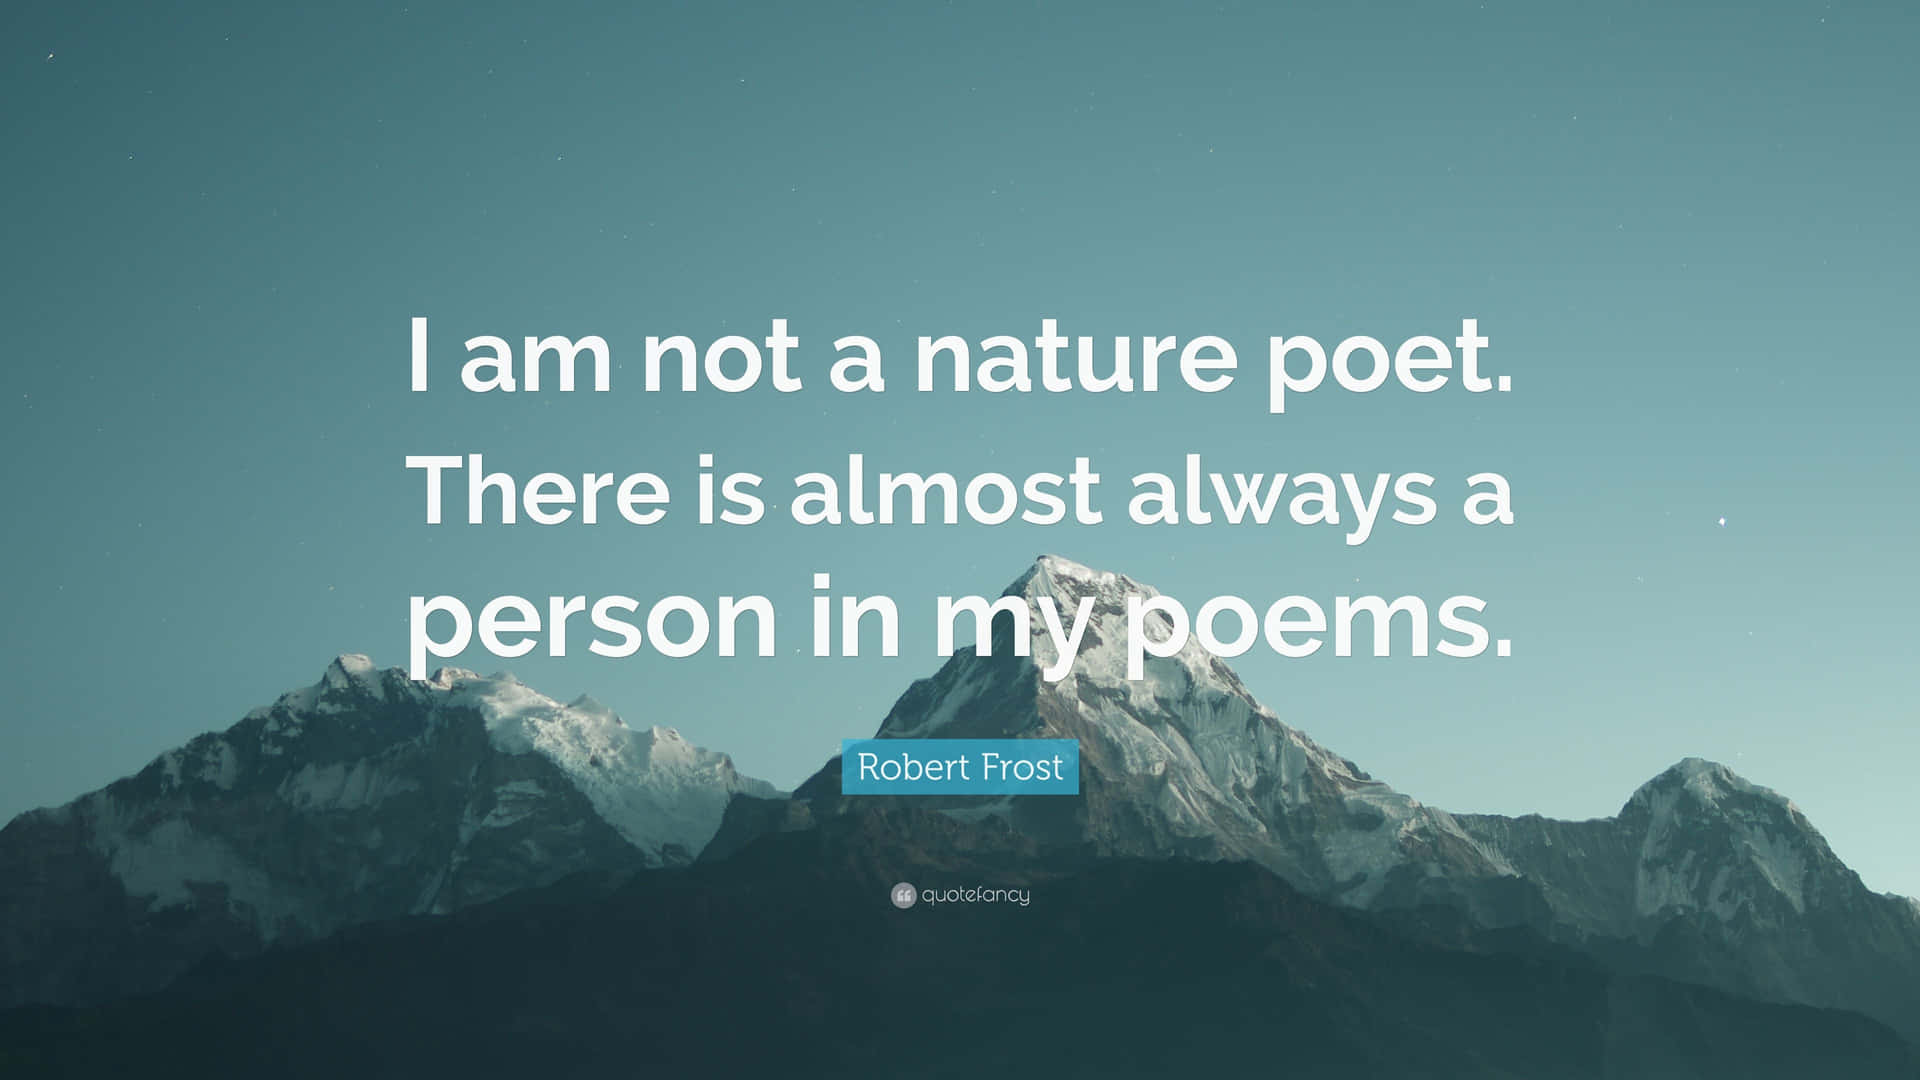 A Mountain With A Quote That Says I Am Not A Nature Poet There Is Almost Always A Person In My Poems Wallpaper